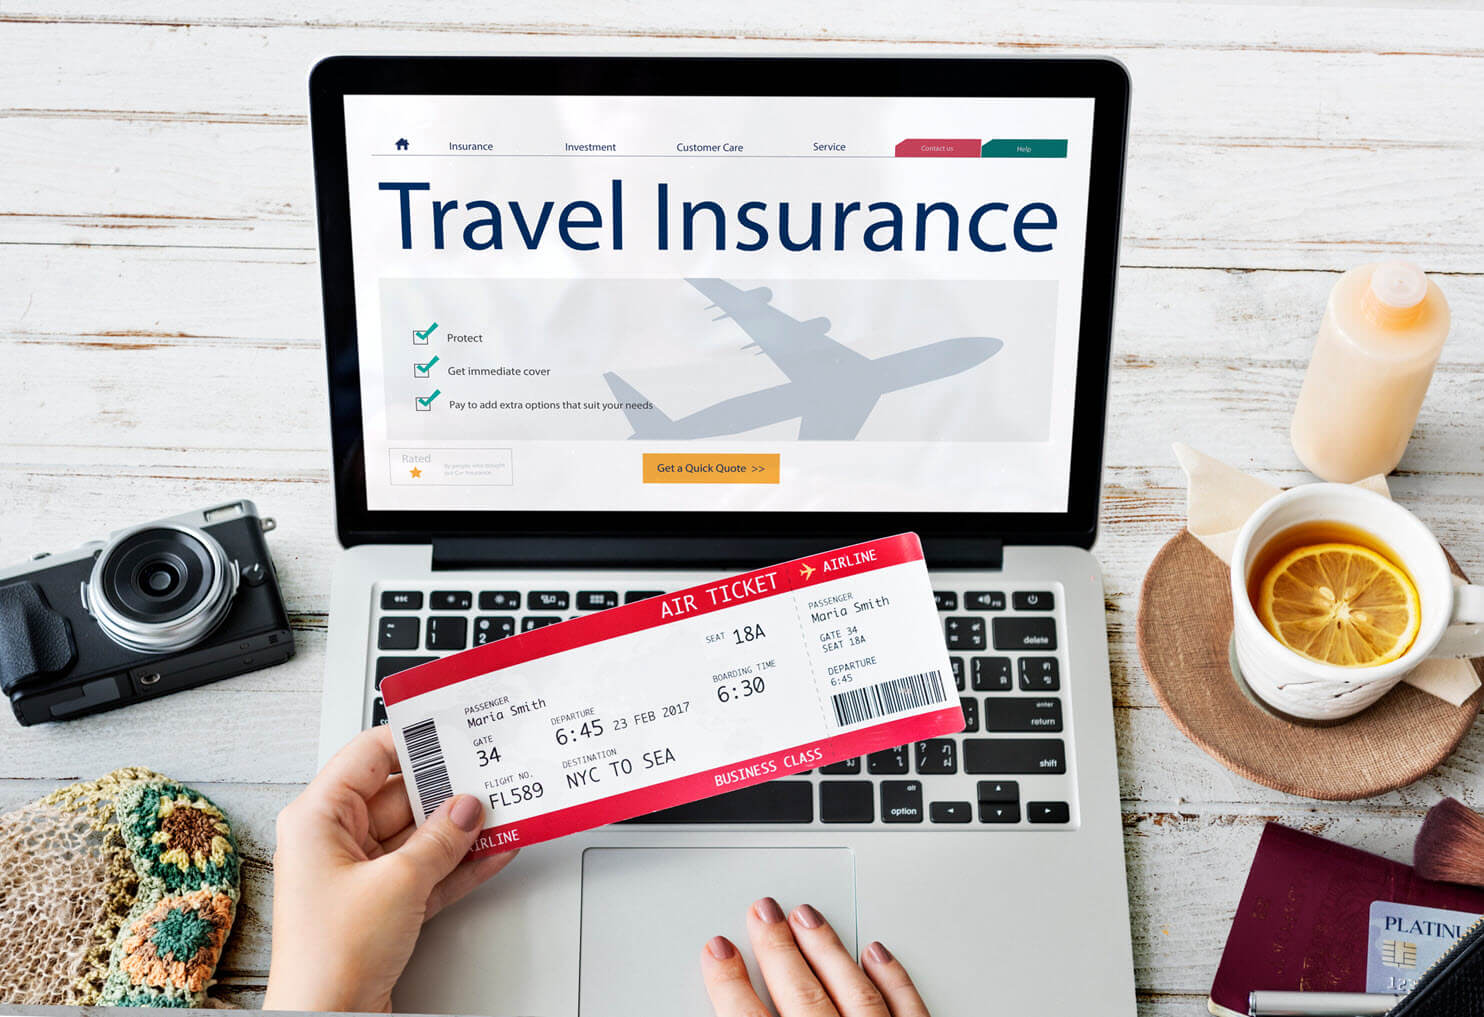 Should we hire a insurance when we travel abroad? %